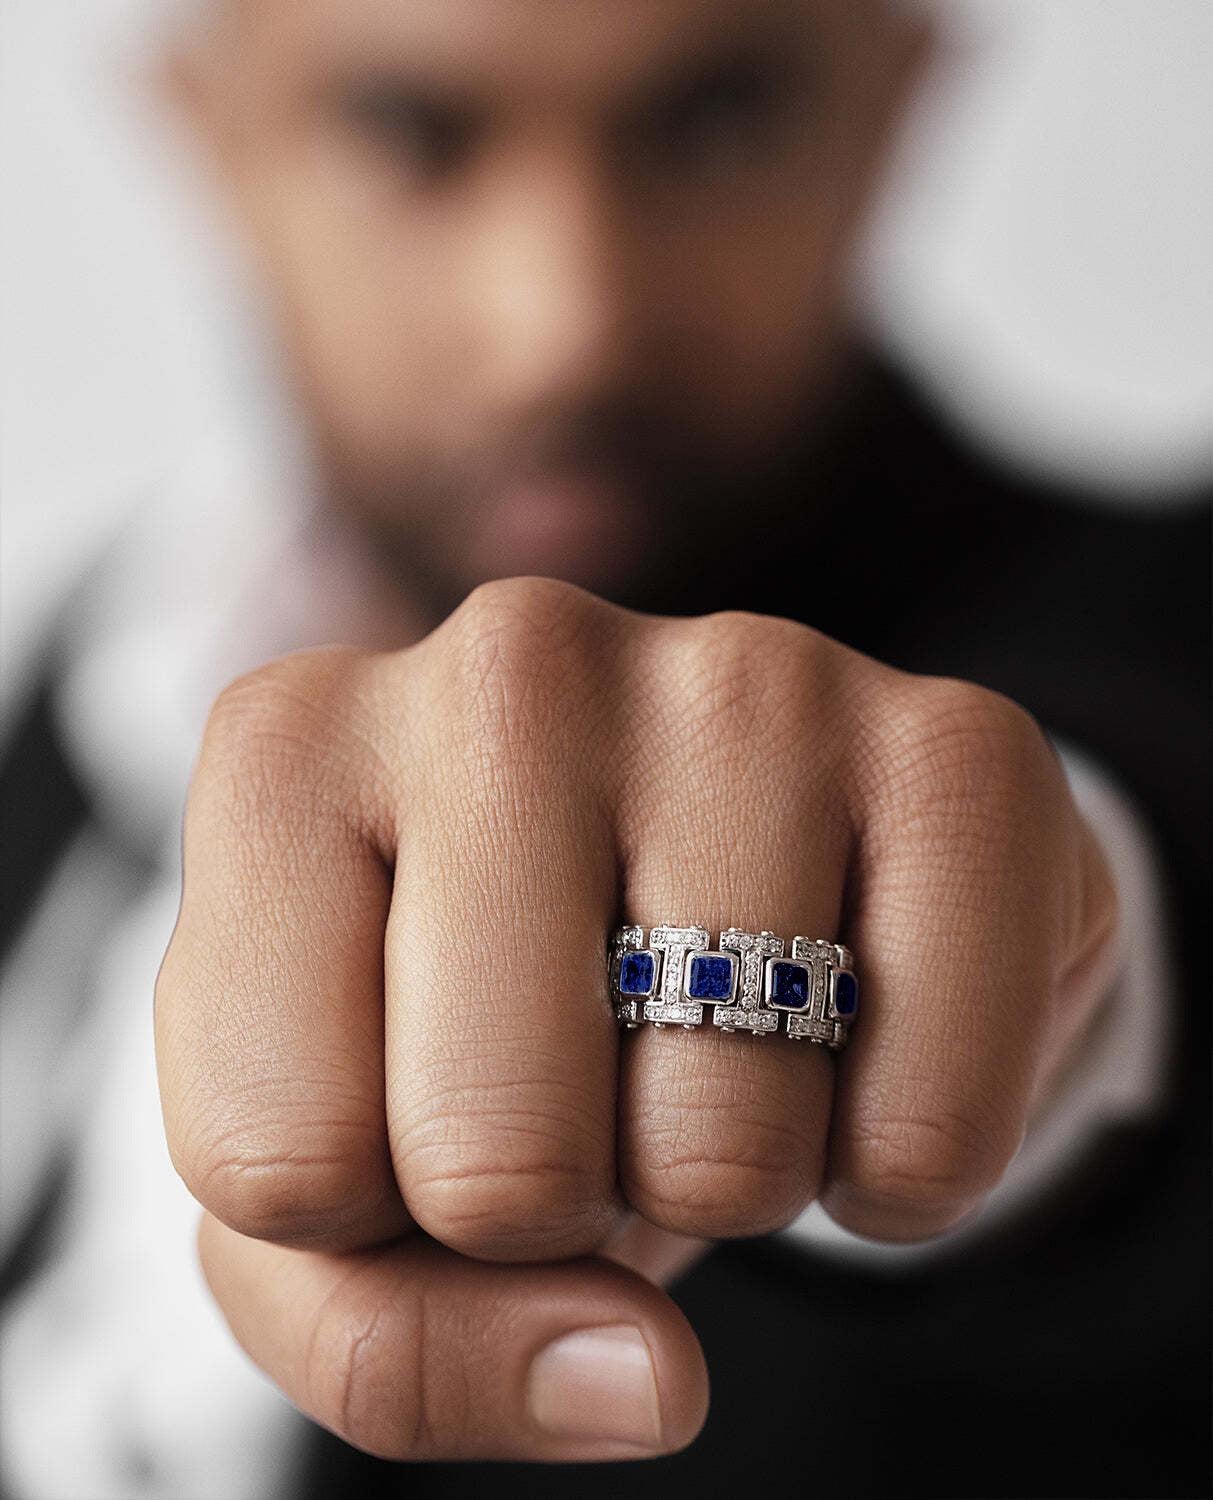 The design of this band bridges two different styles in its variations of 4.70ct sapphires pave setting and metals: contemporary classic and cutting-edge modern. The La Paz, often enjoyed as an exceptional statement piece, can even be worn as a